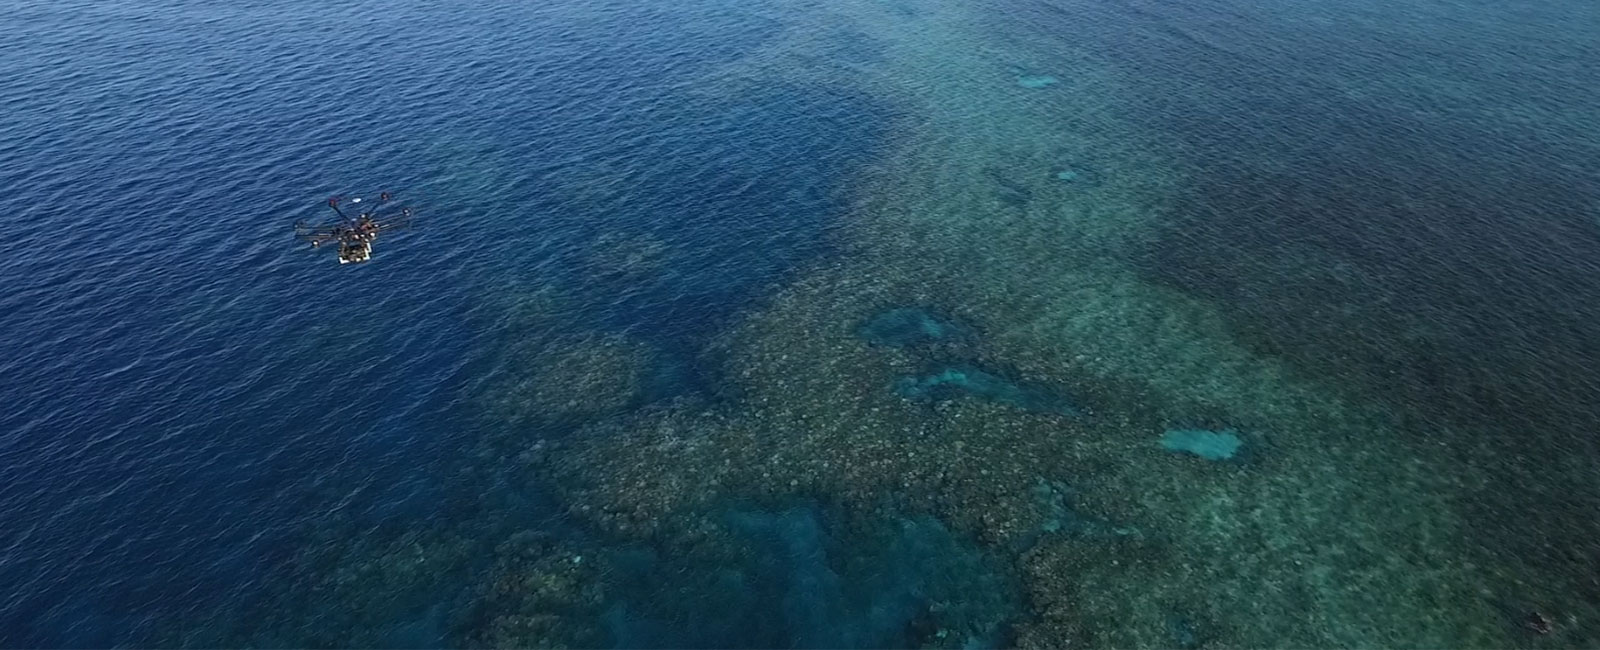 Visualising AI - Drone above the Great Barrier Reef - Credit QUT